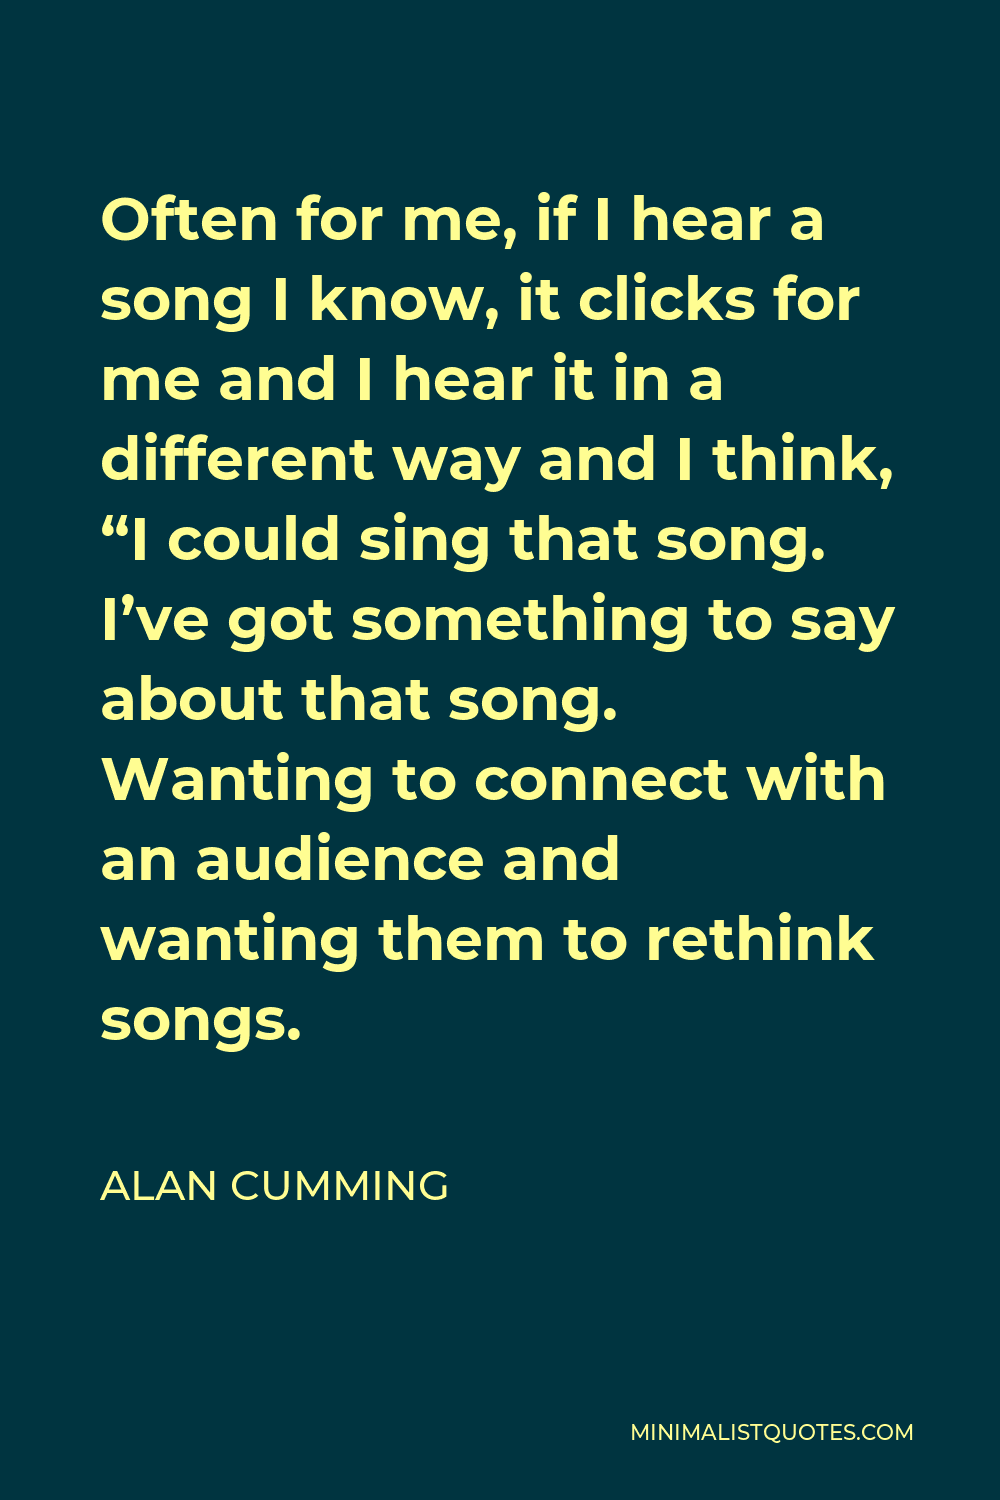 Alan Cumming Quote - Often for me, if I hear a song I know, it clicks for me and I hear it in a different way and I think, “I could sing that song. I’ve got something to say about that song. Wanting to connect with an audience and wanting them to rethink songs.